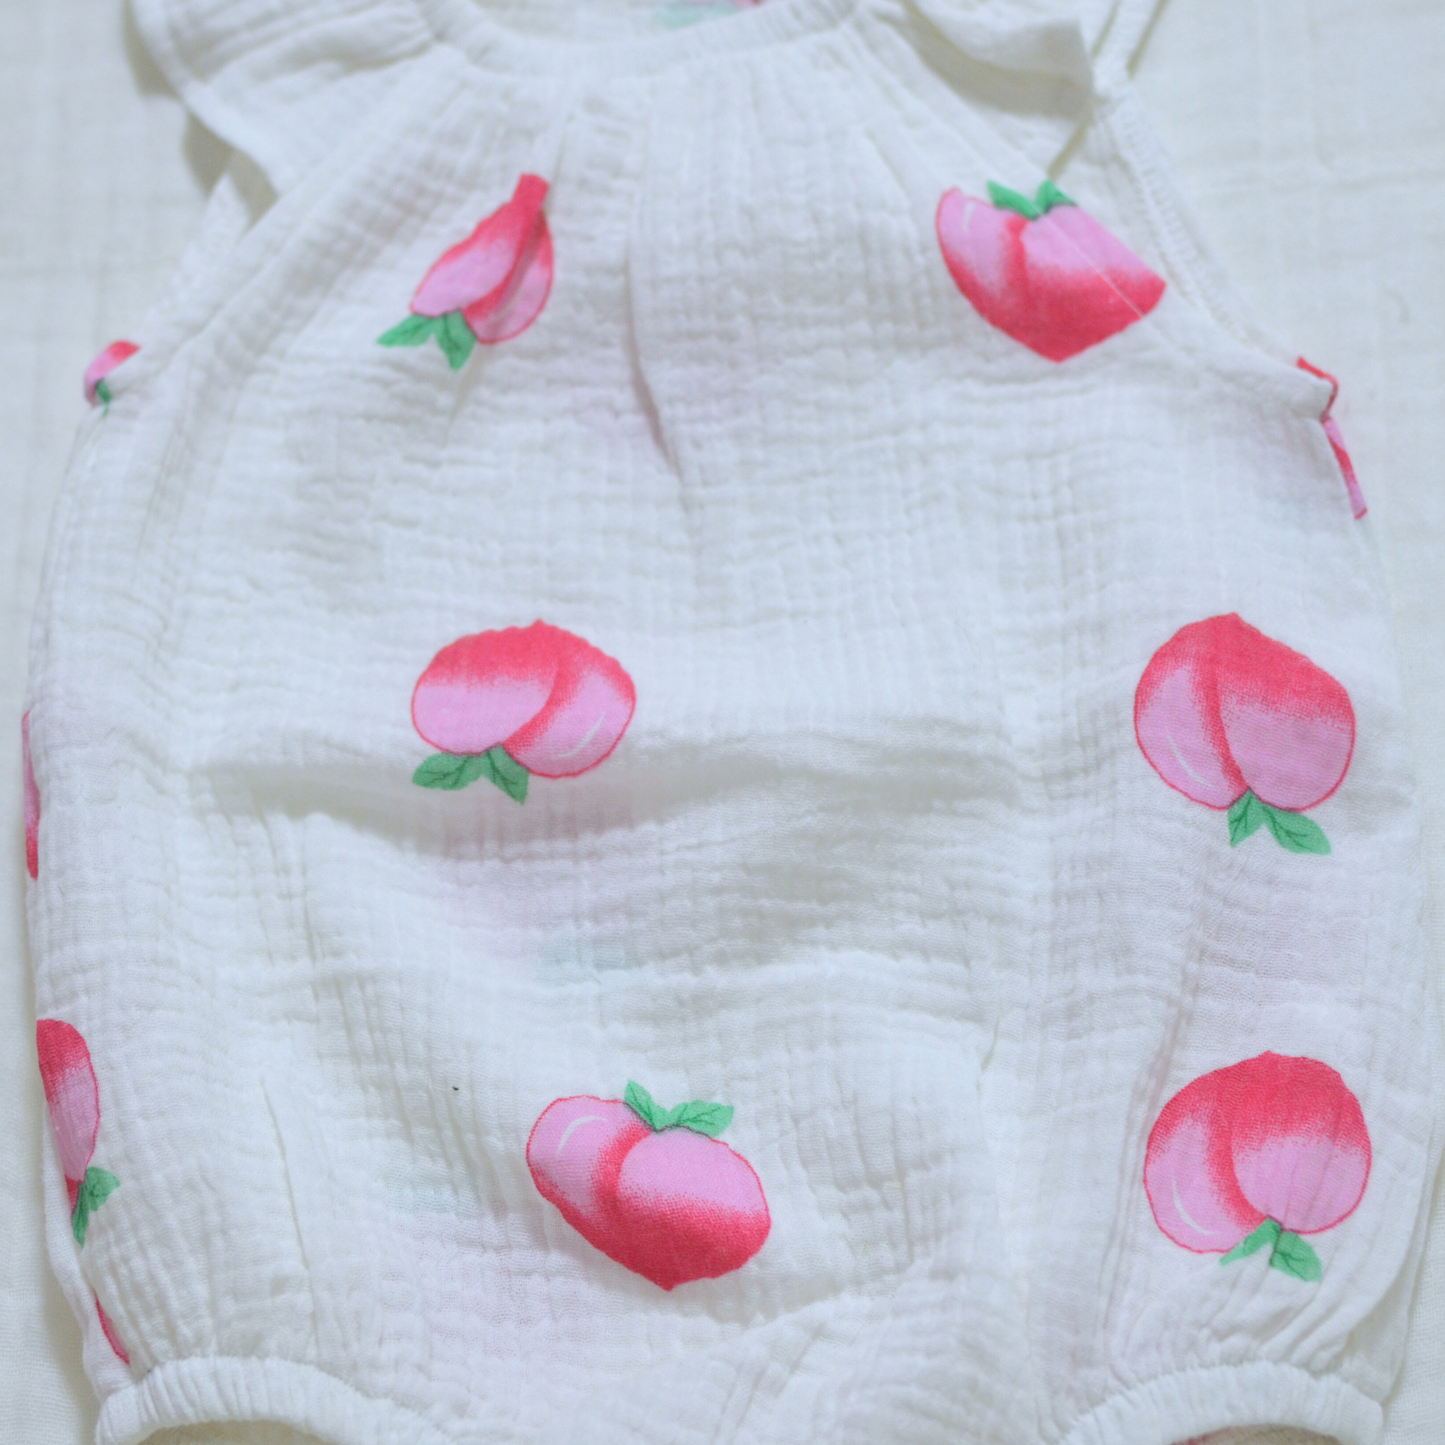 Muslin Ruffled Sleeve Baby Romper - 0 to 6 Month Size